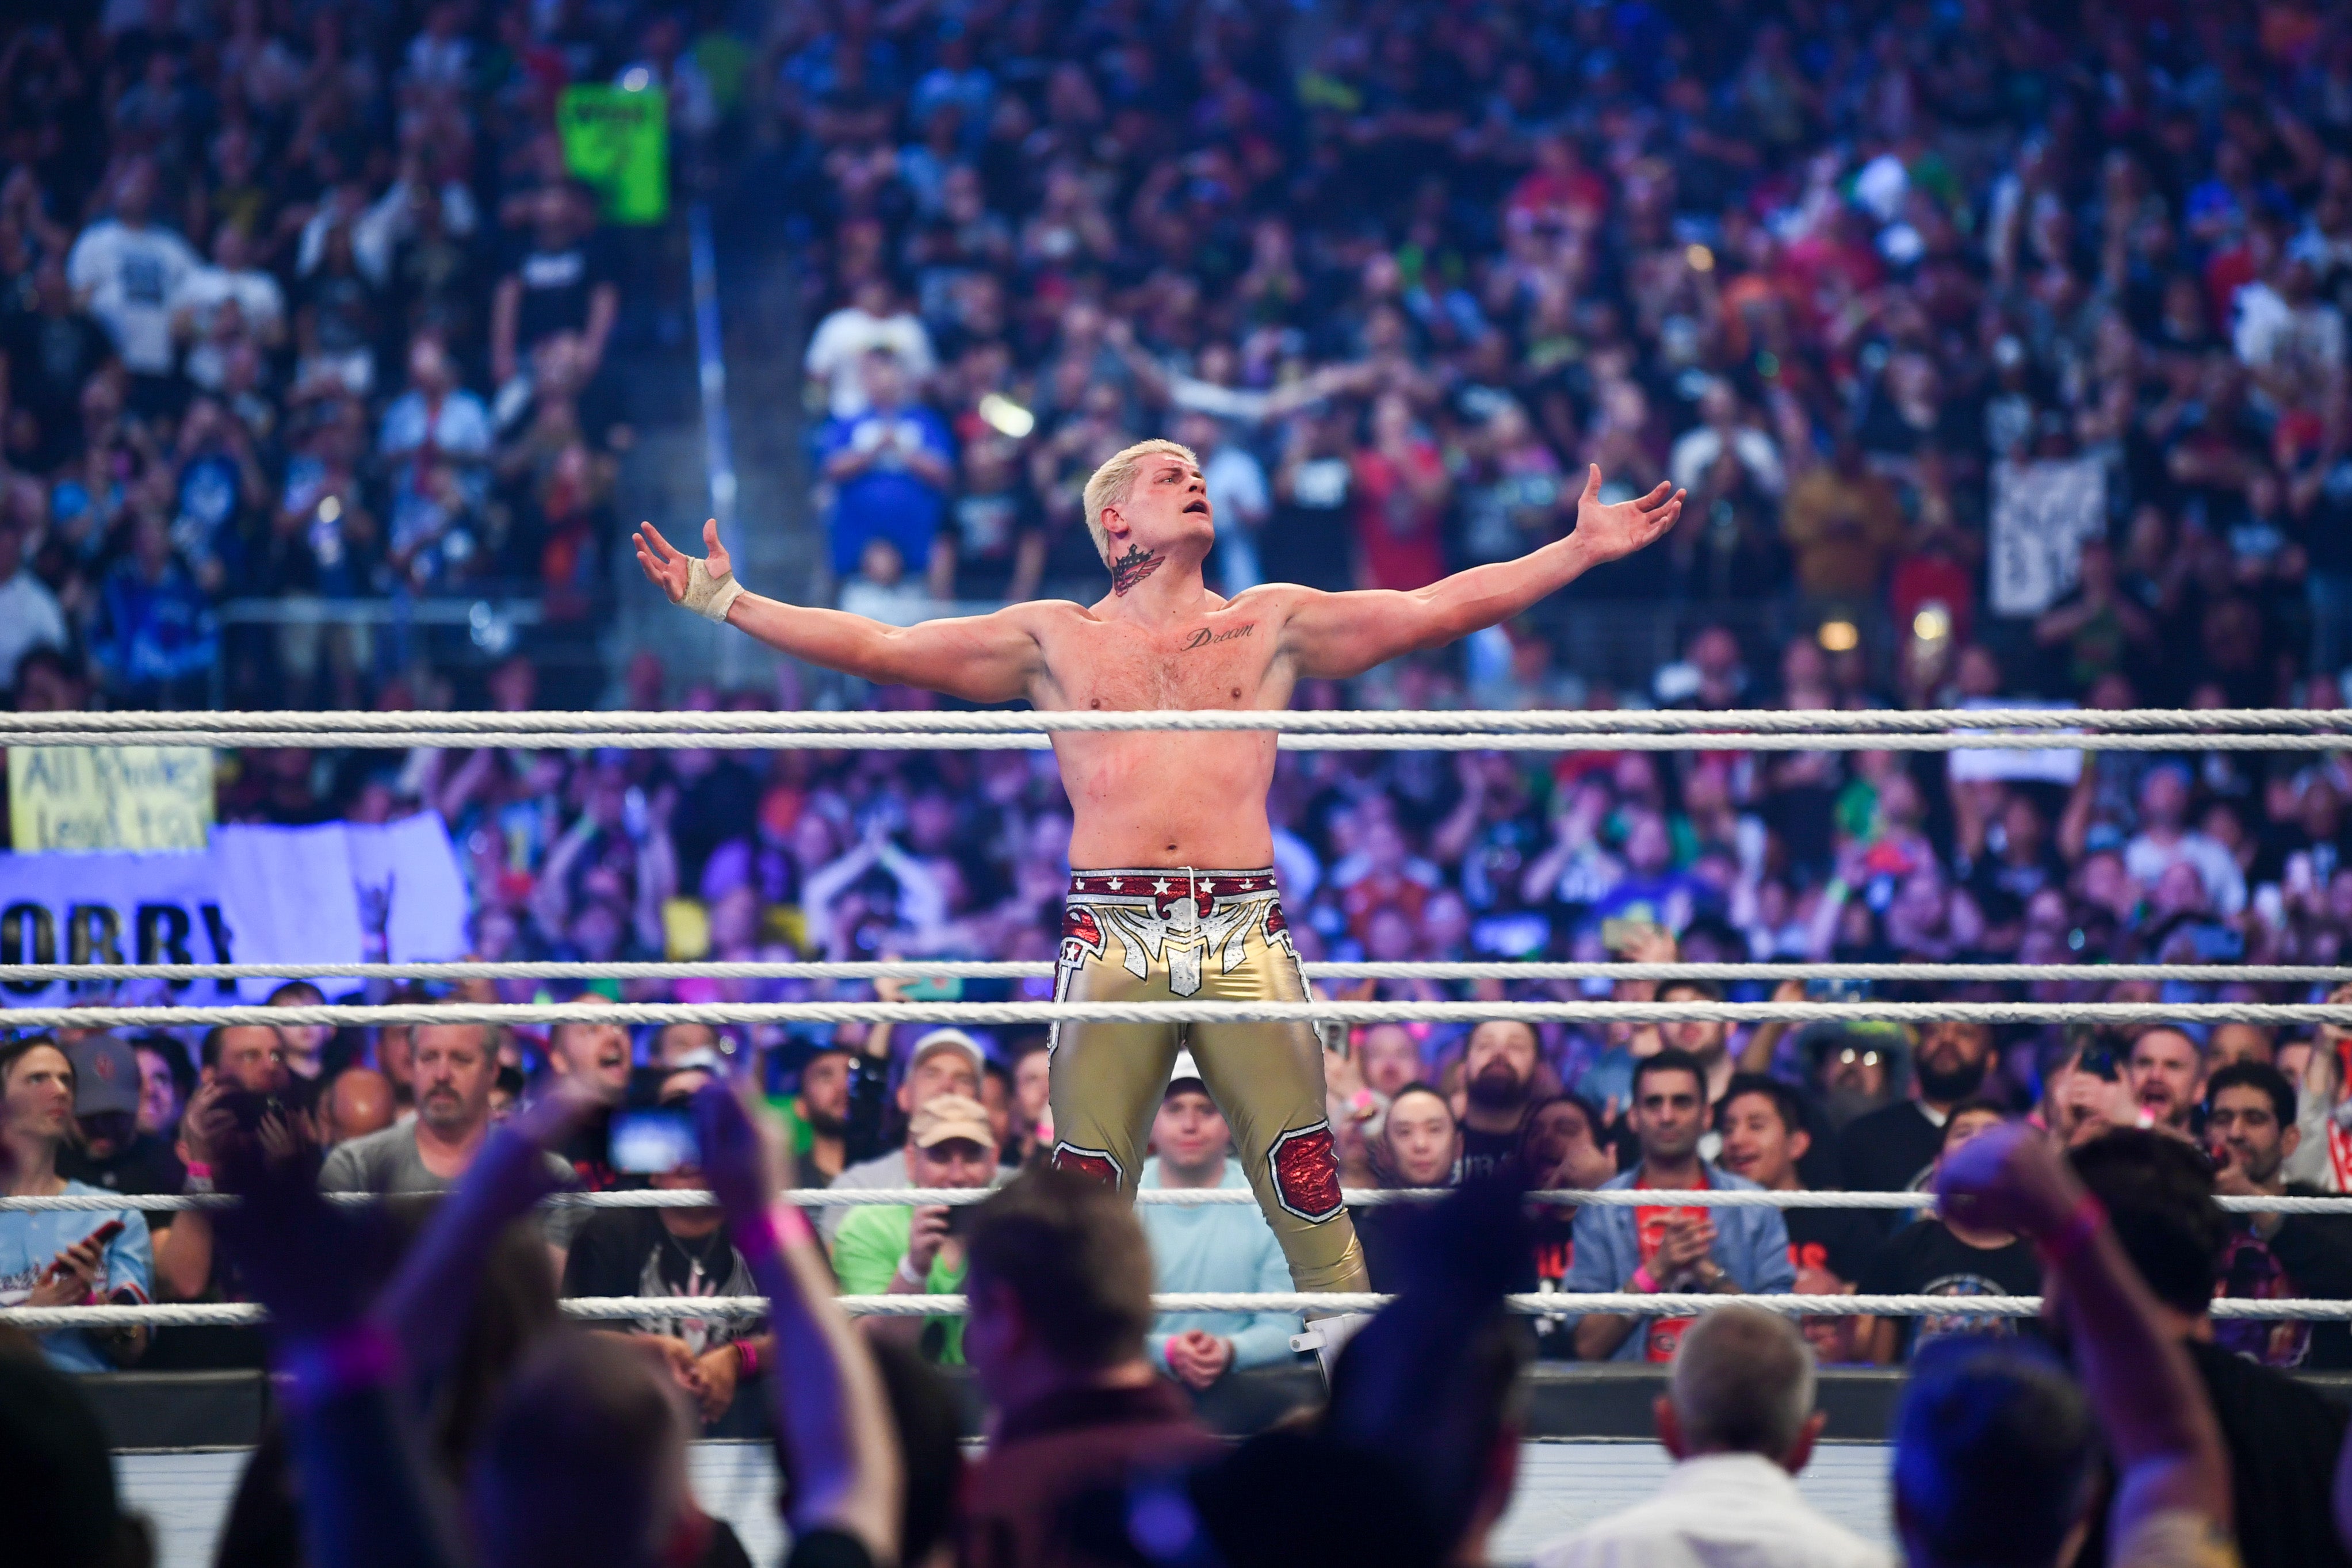 WWE events attract thousands of visitors